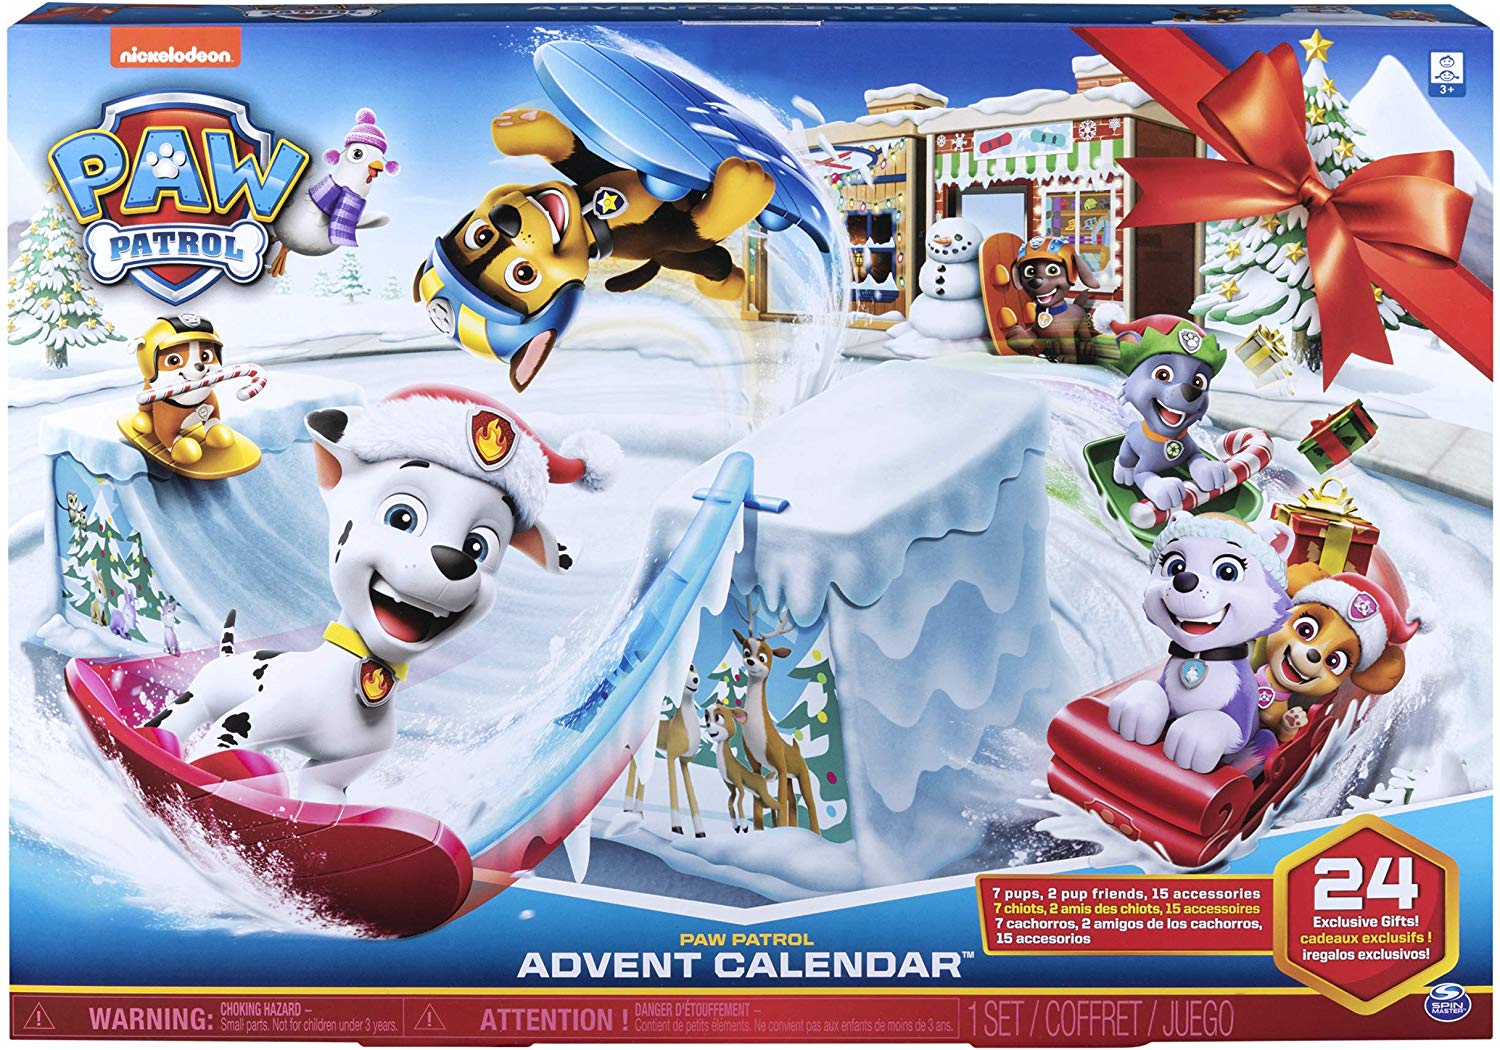 Paw Patrol 6052489 Advent Calendar 2019 With Collectible Items For Children